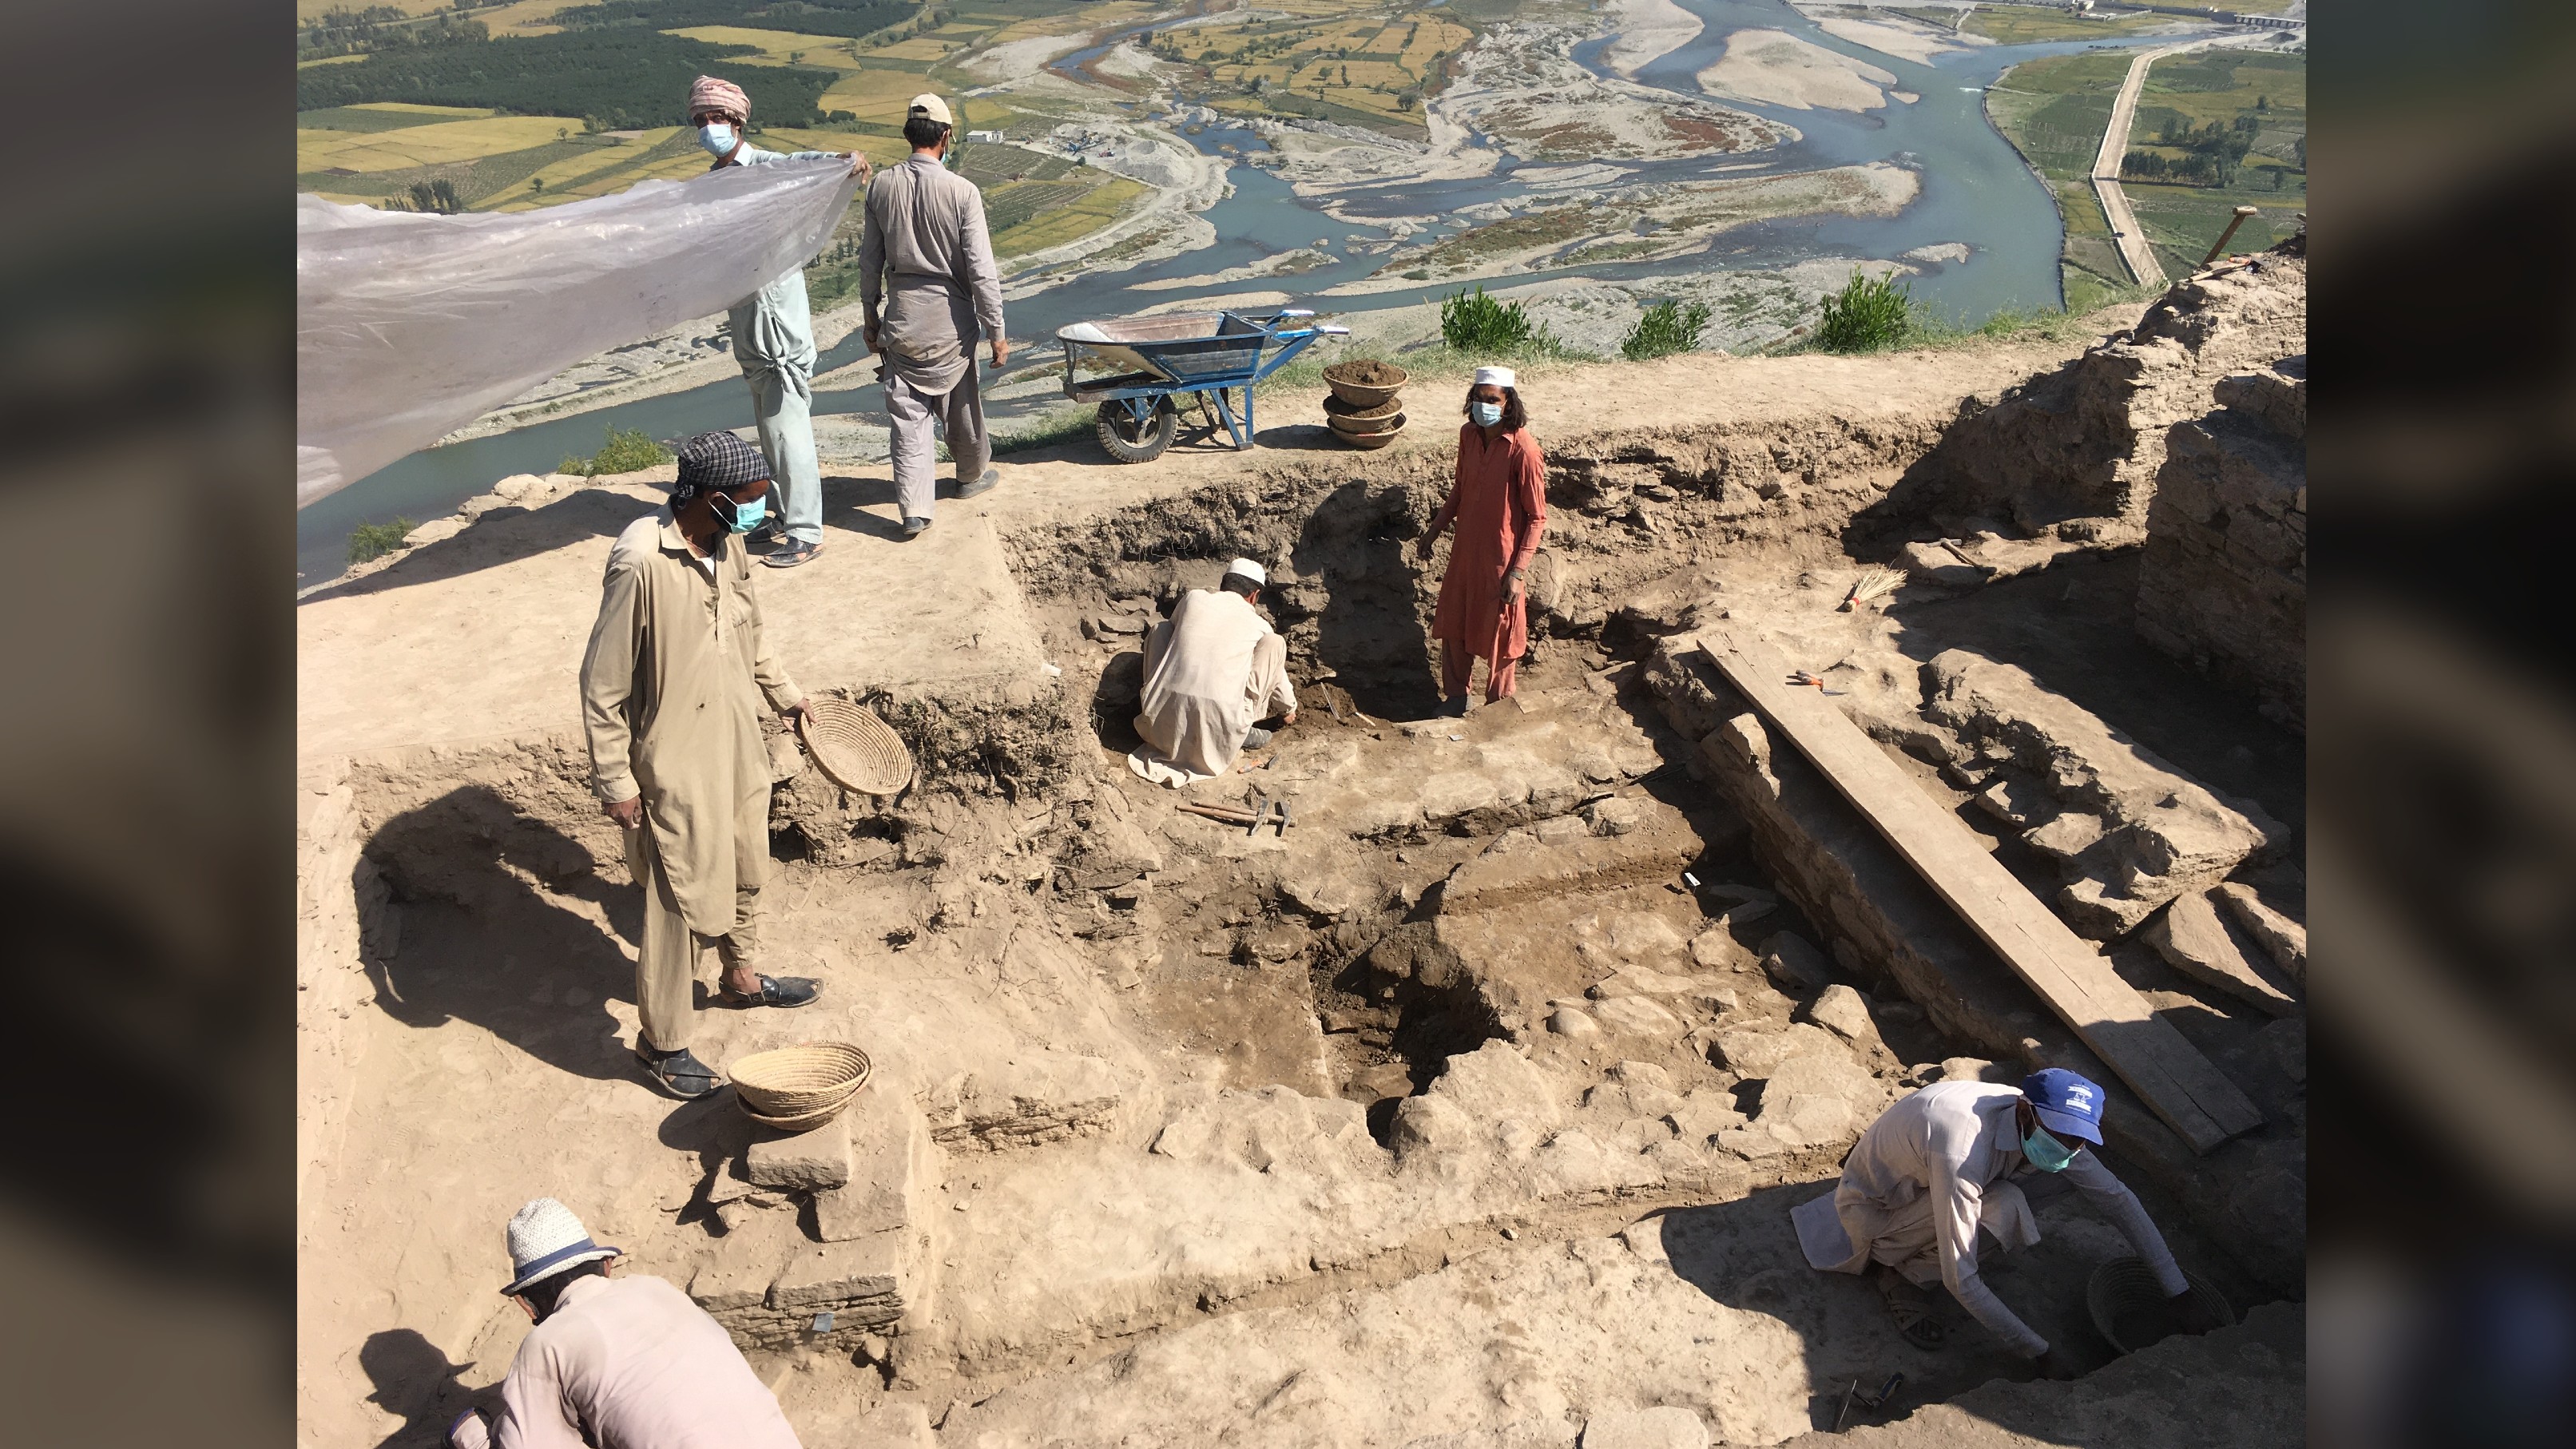 Italian archaeologists and colleagues from Pakistan started excavations at Barikot in 1984. The Swat River can be seen here below the acropolis.